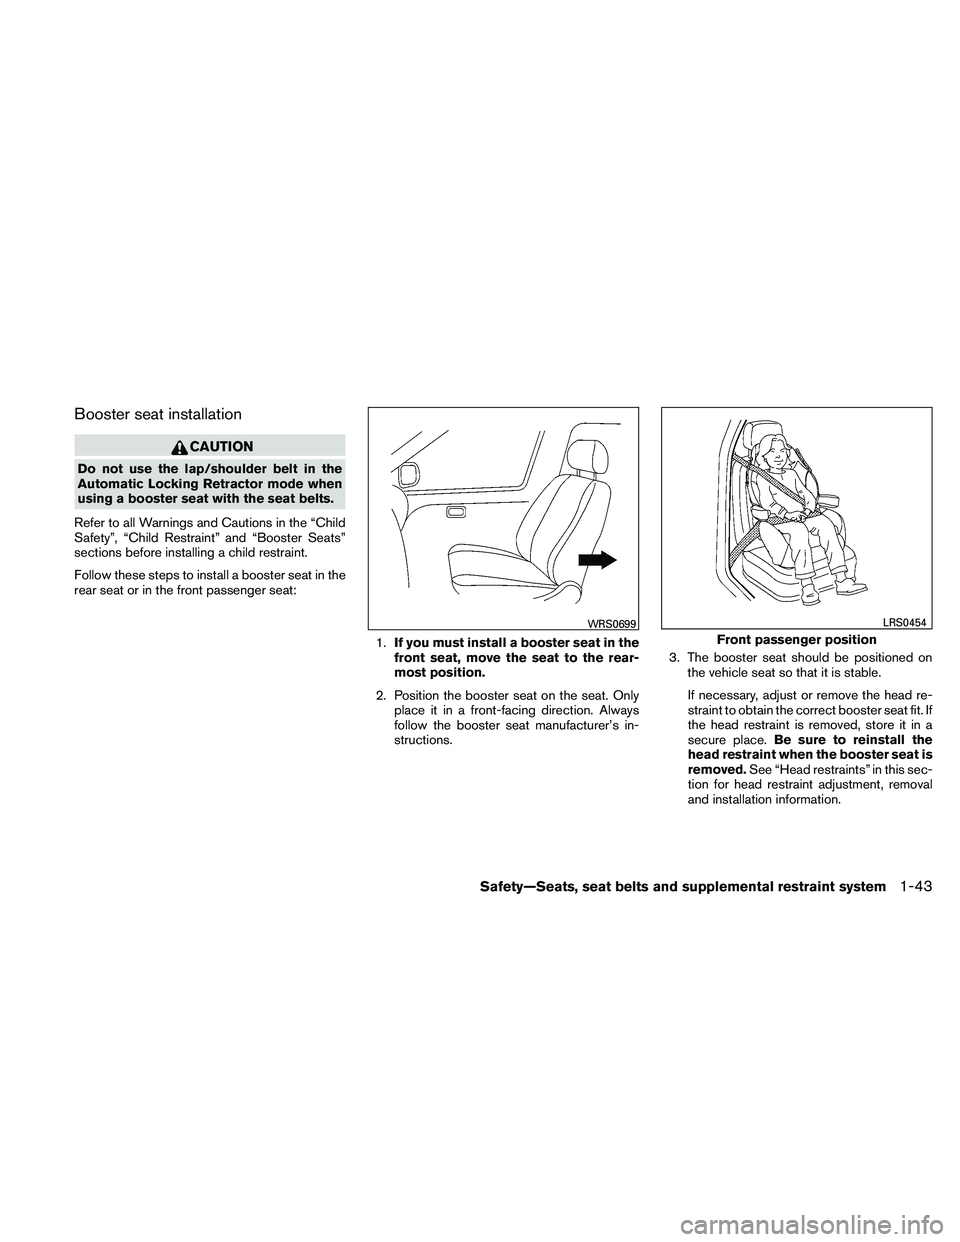 NISSAN XTERRA 2010  Owner´s Manual Booster seat installation
CAUTION
Do not use the lap/shoulder belt in the
Automatic Locking Retractor mode when
using a booster seat with the seat belts.
Refer to all Warnings and Cautions in the “C